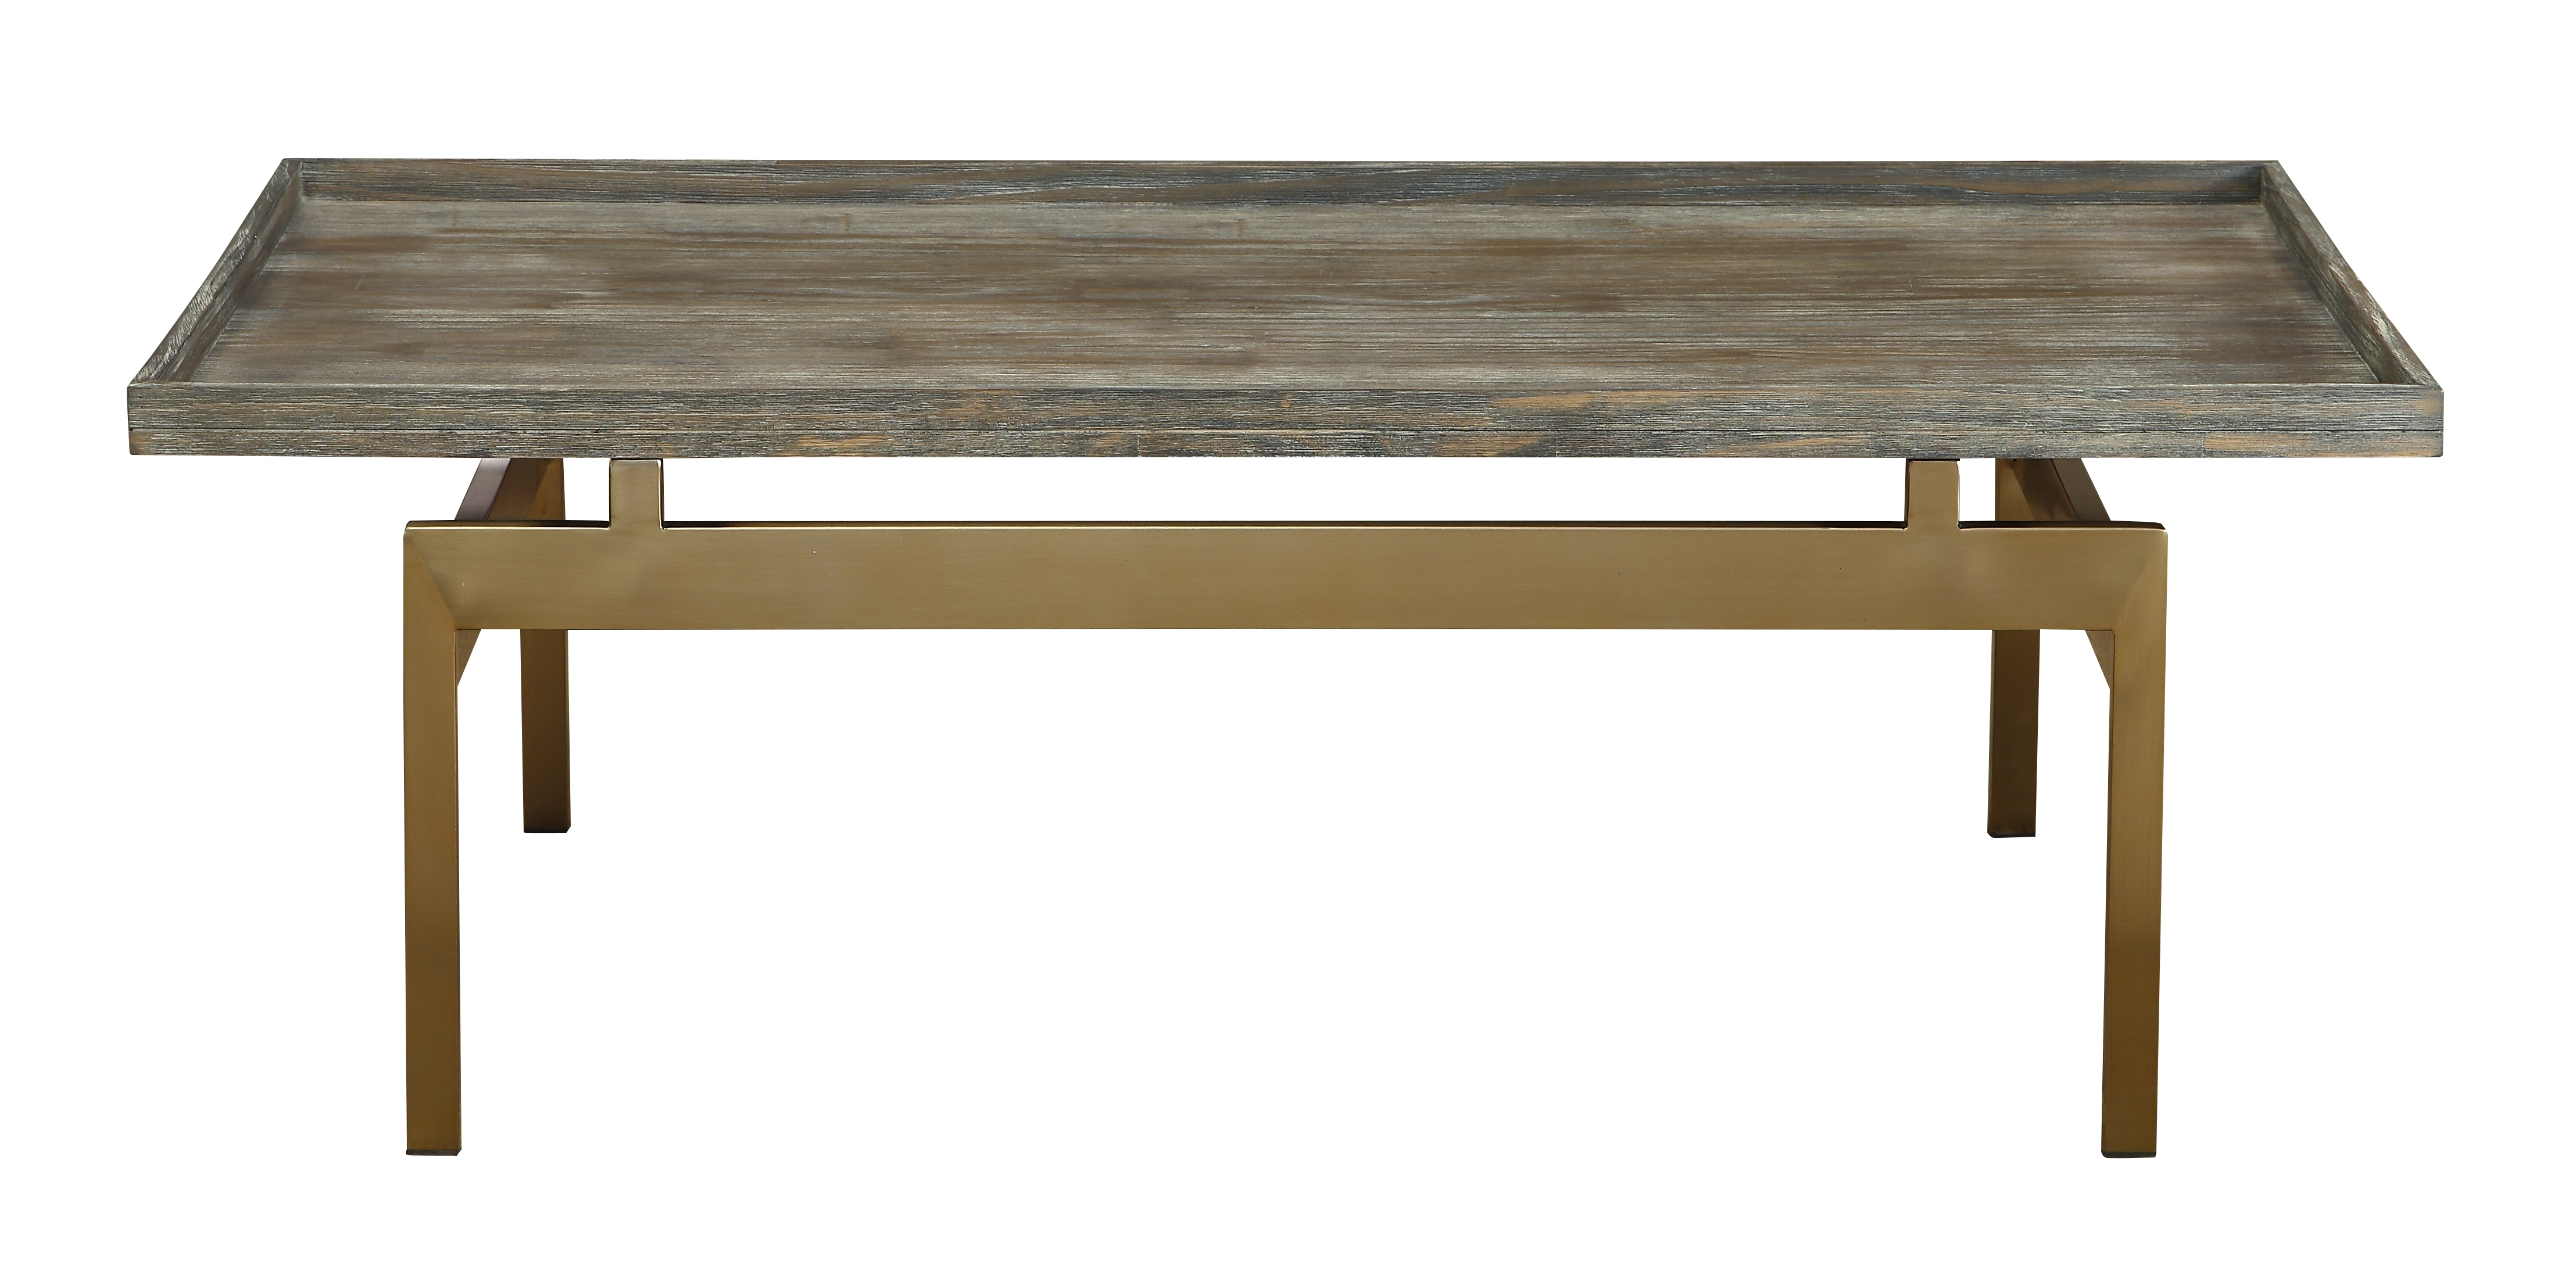 Biscayne Cocktail Table - Biscayne Weathered - Image 1